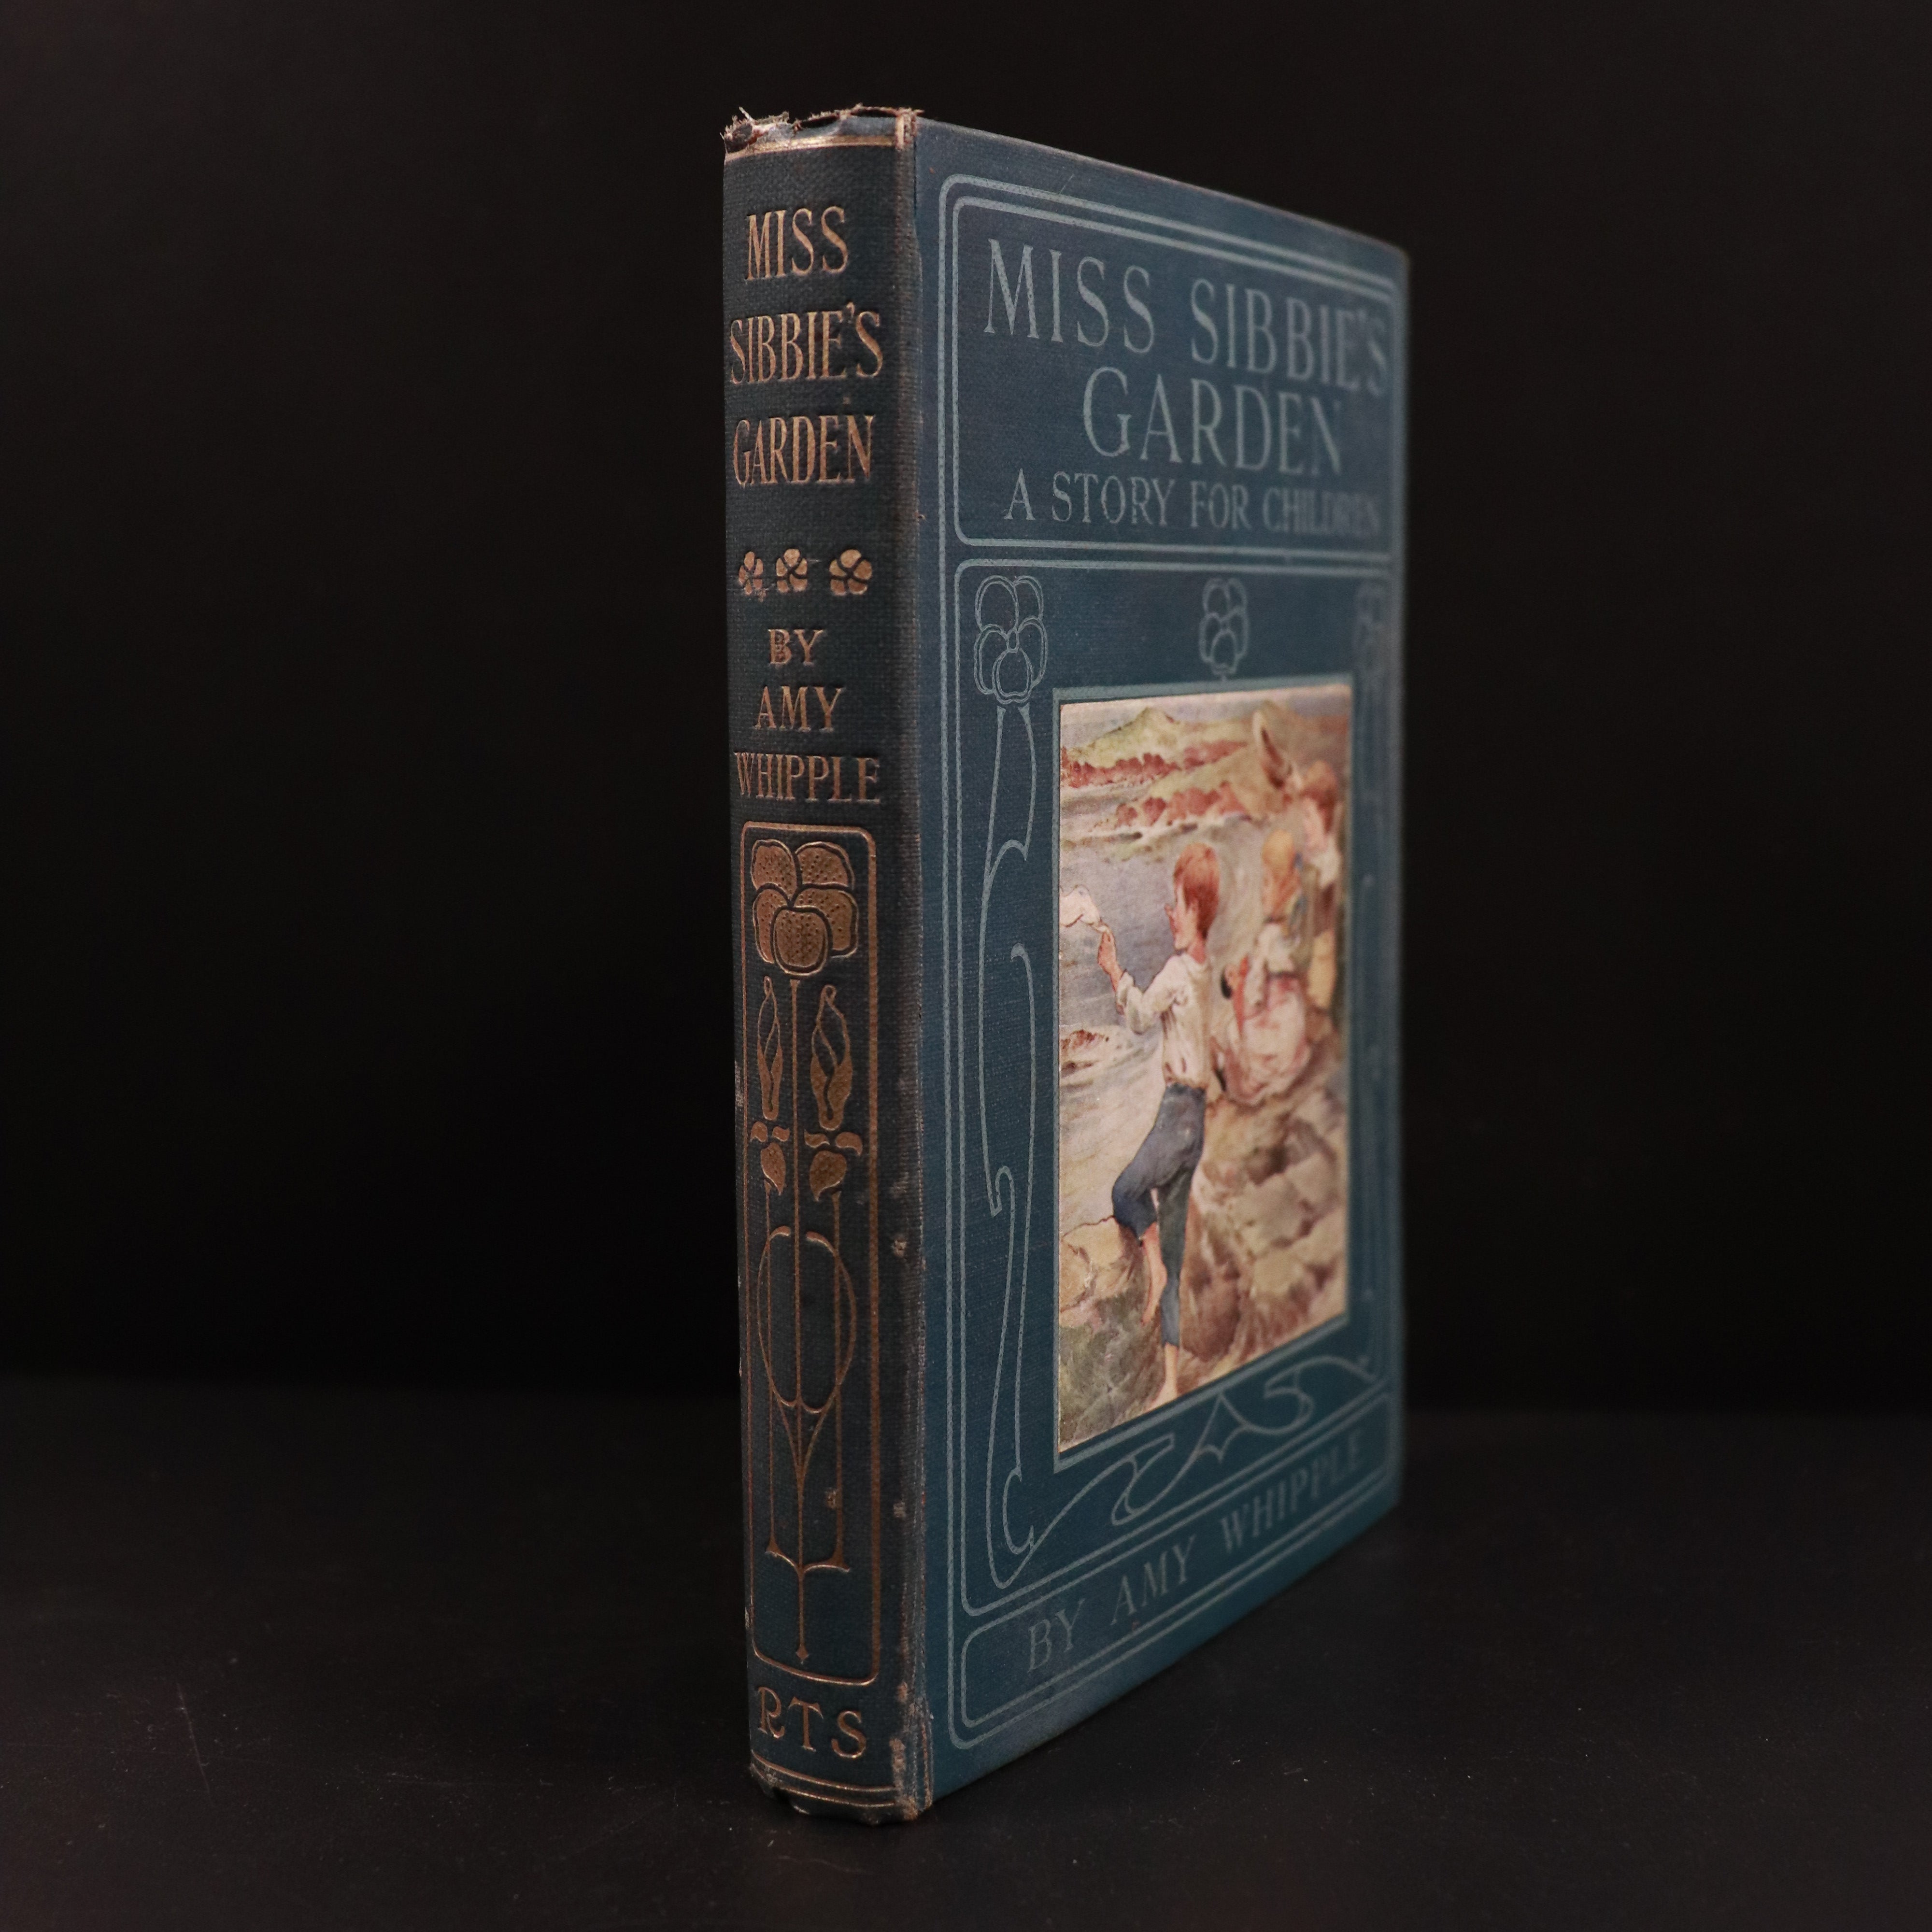 1907 Miss Sibbie's Garden by Amy Whipple Antique Illustrated Childrens Book